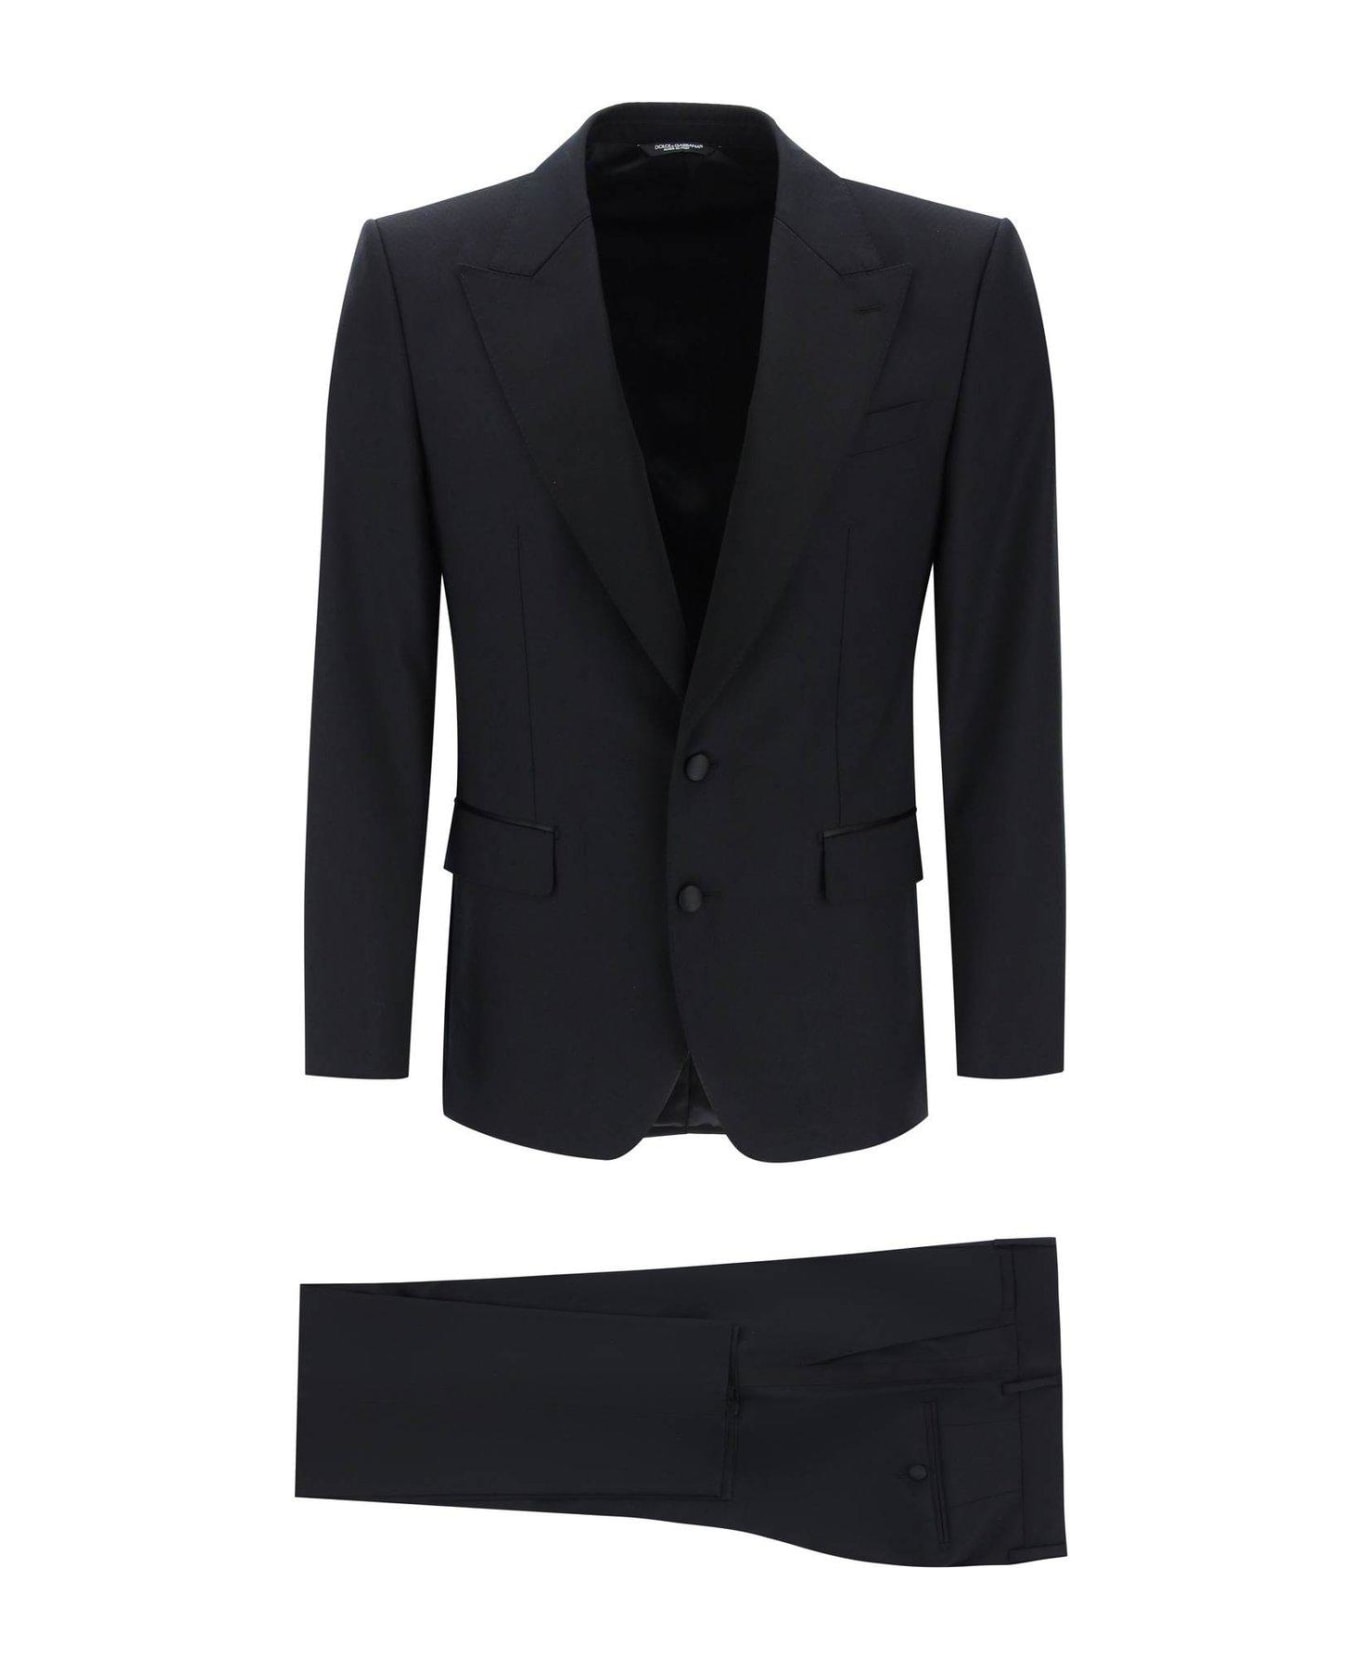 Dolce LACE & Gabbana Single-breasted Pressed Crease Tailored Suit